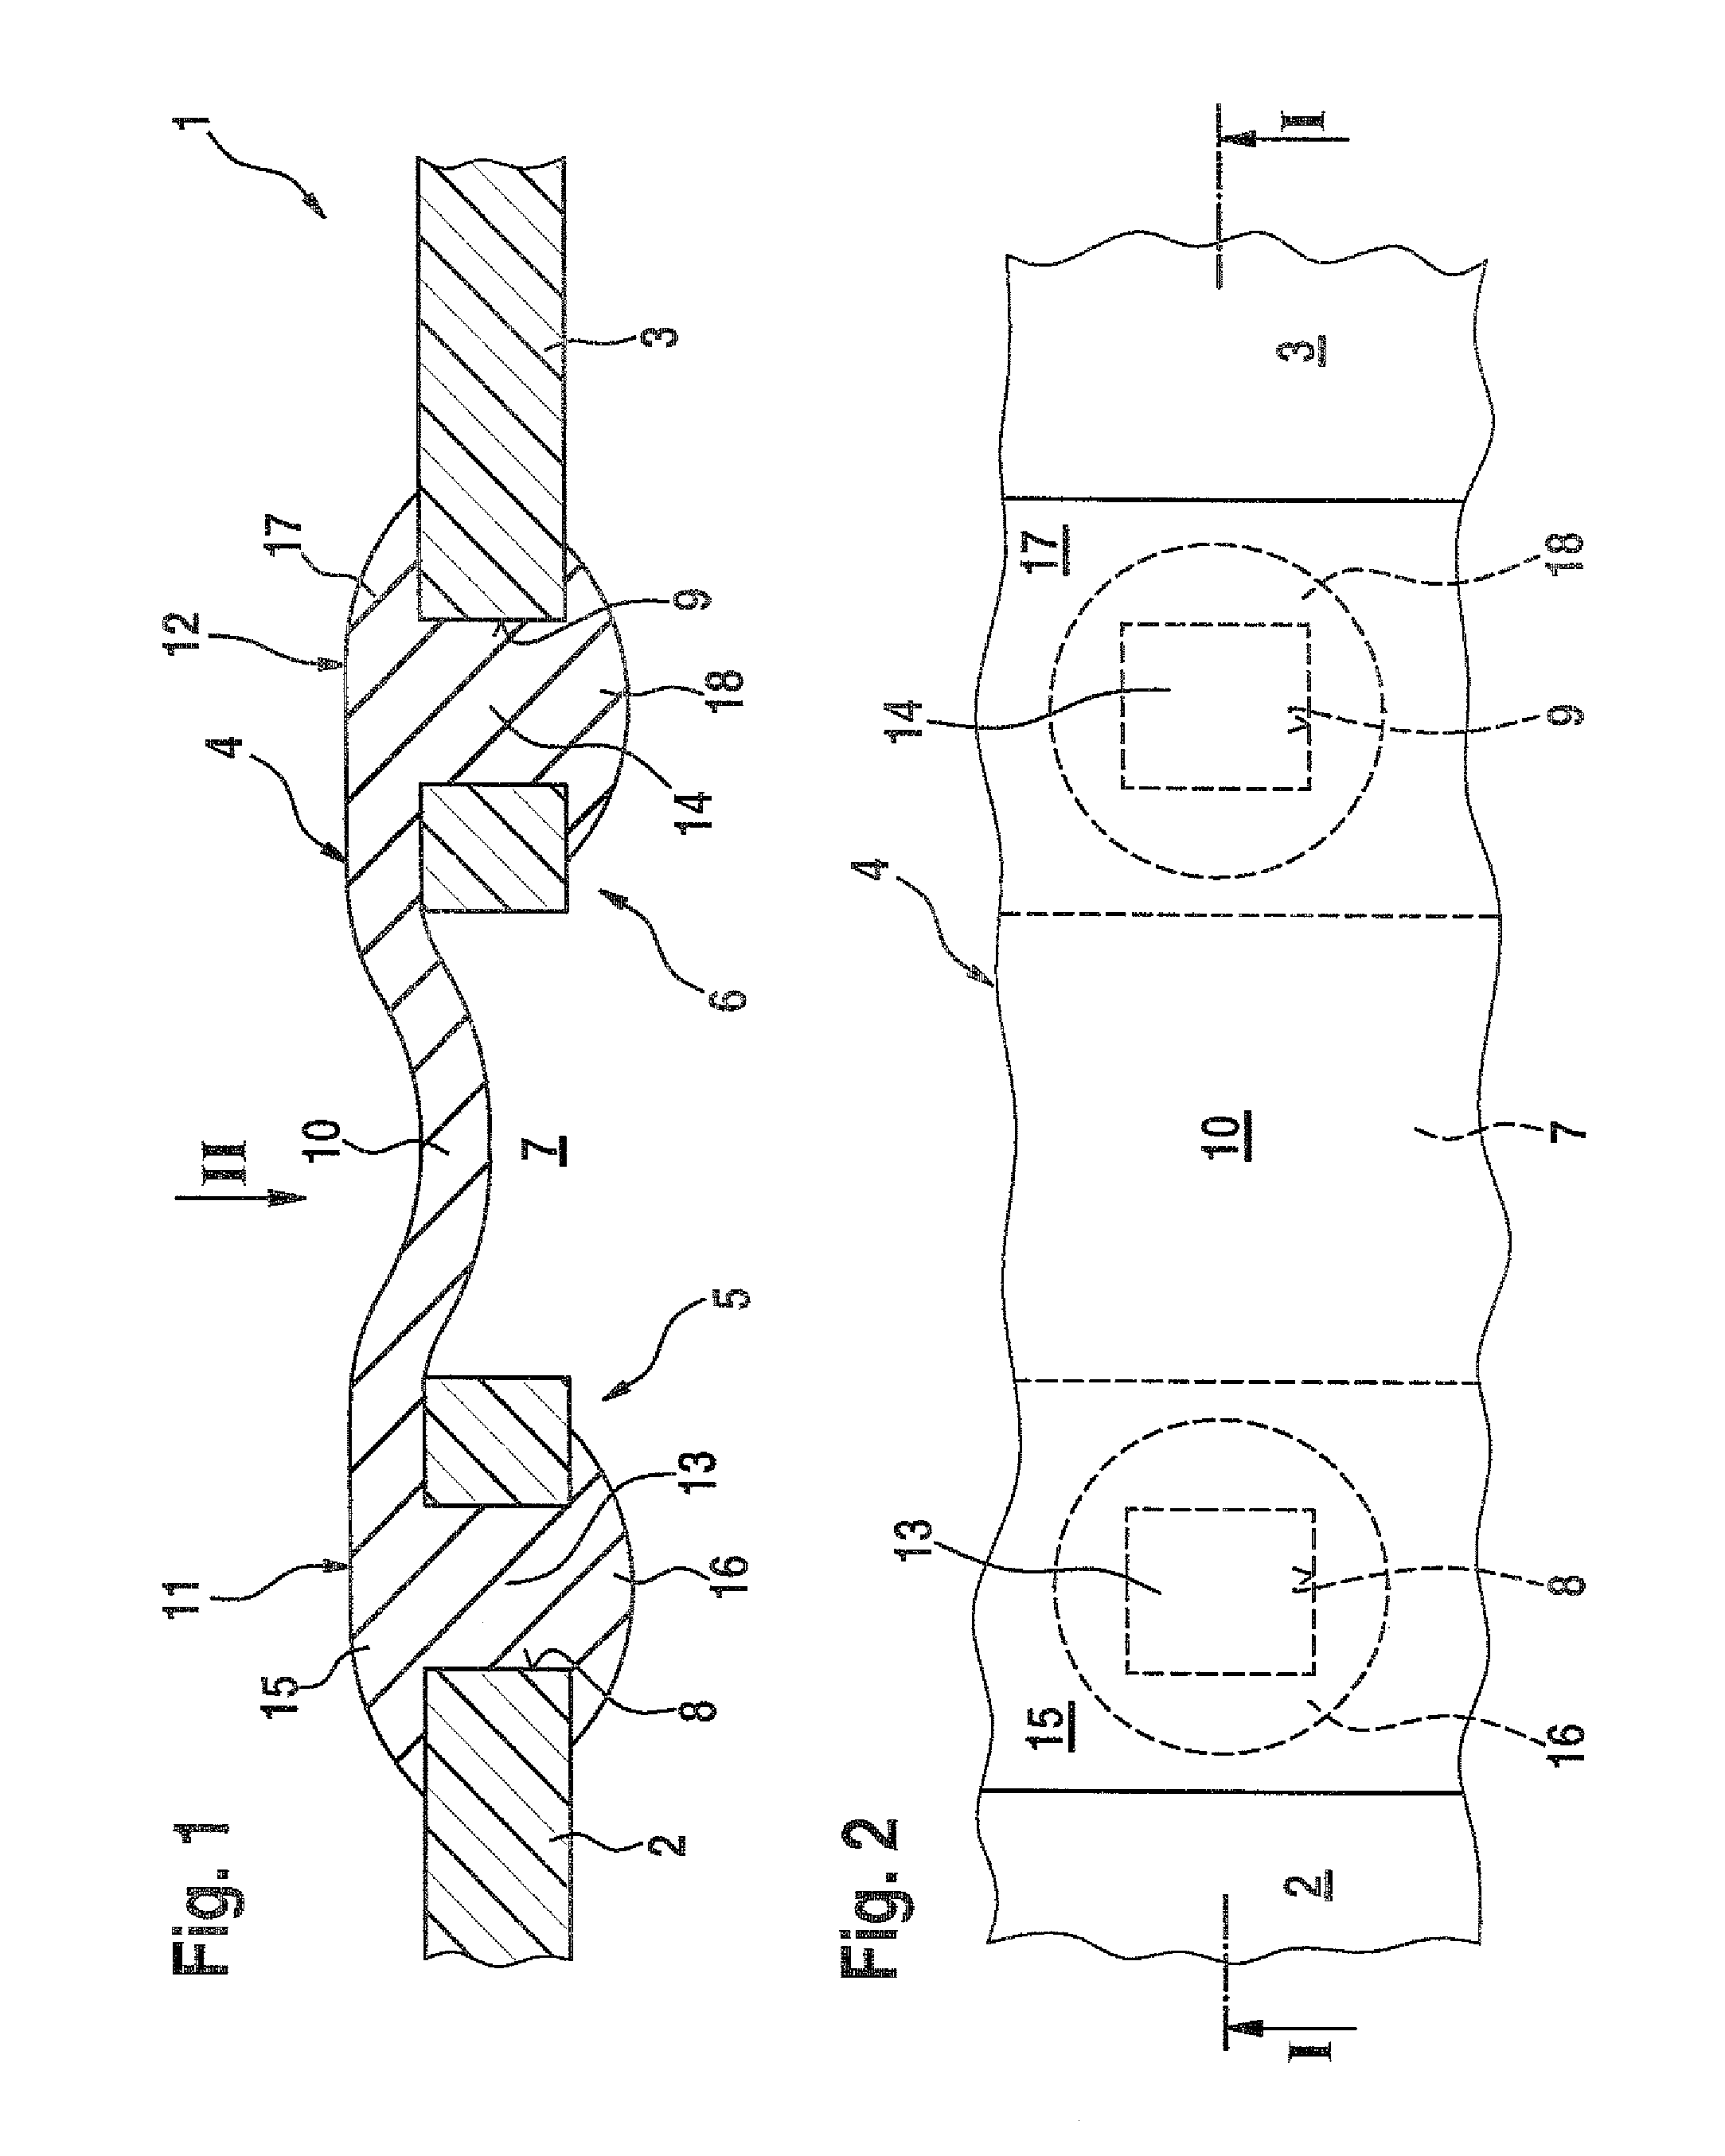 Elastic connection between housing parts of motor-driven power tools